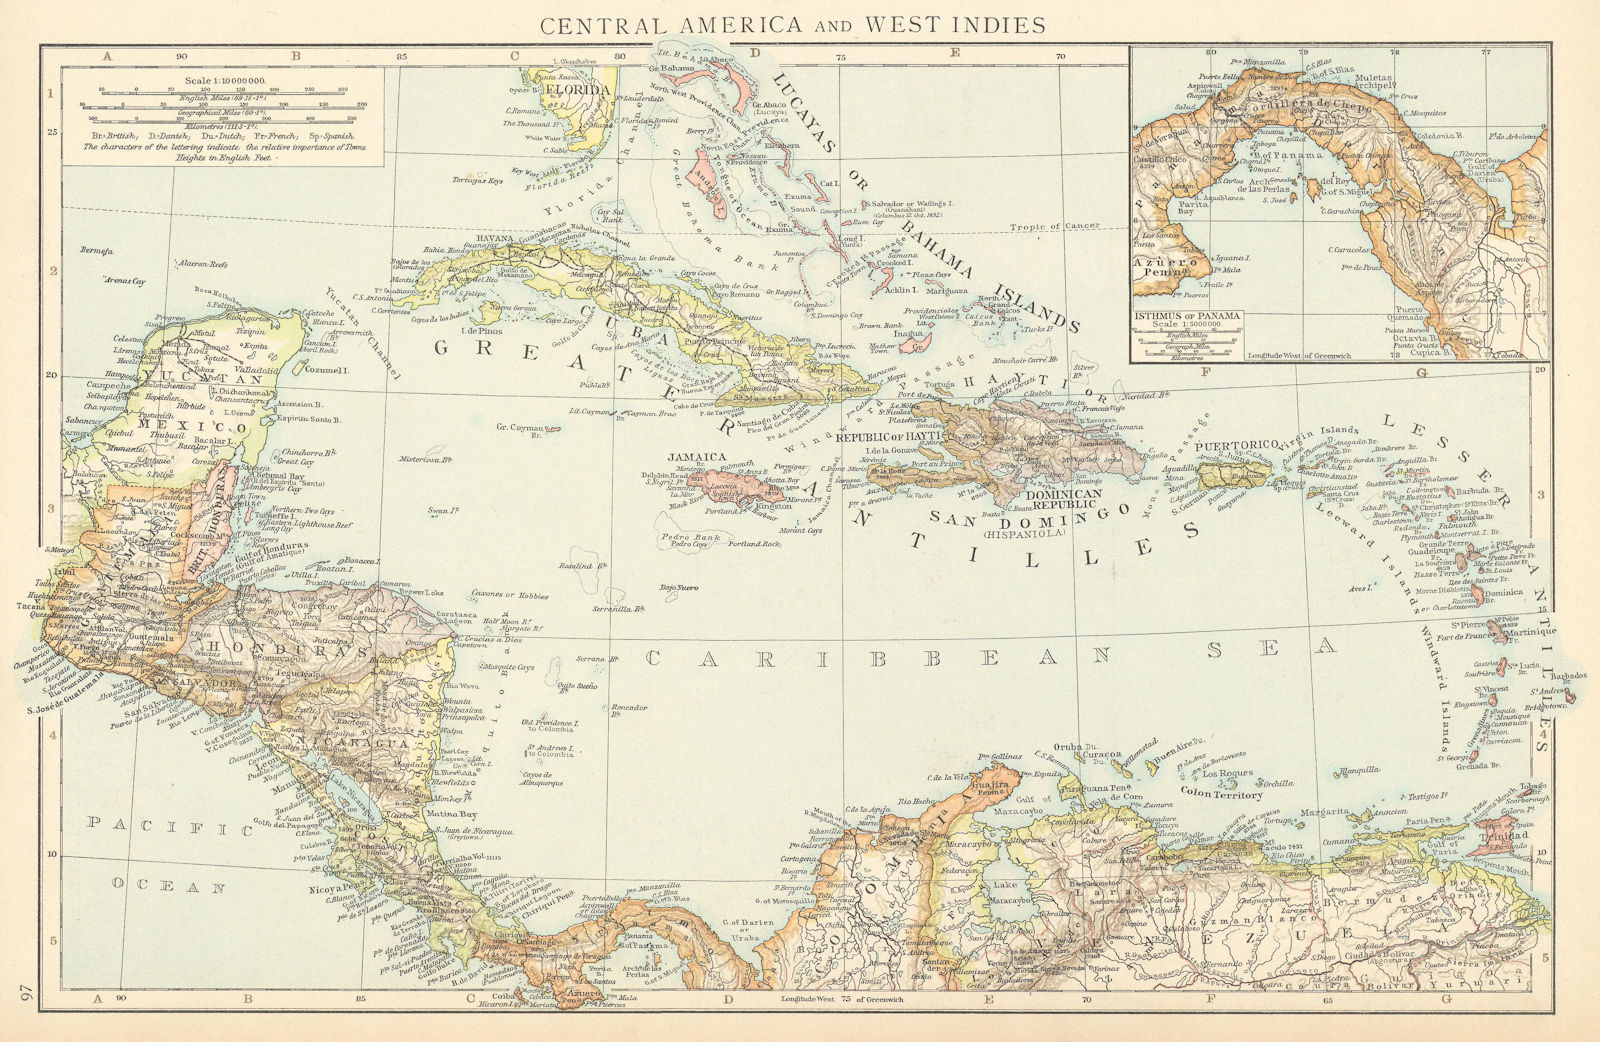 Associate Product Central America & West Indies. Caribbean. Panama. TIMES 1895 old antique map